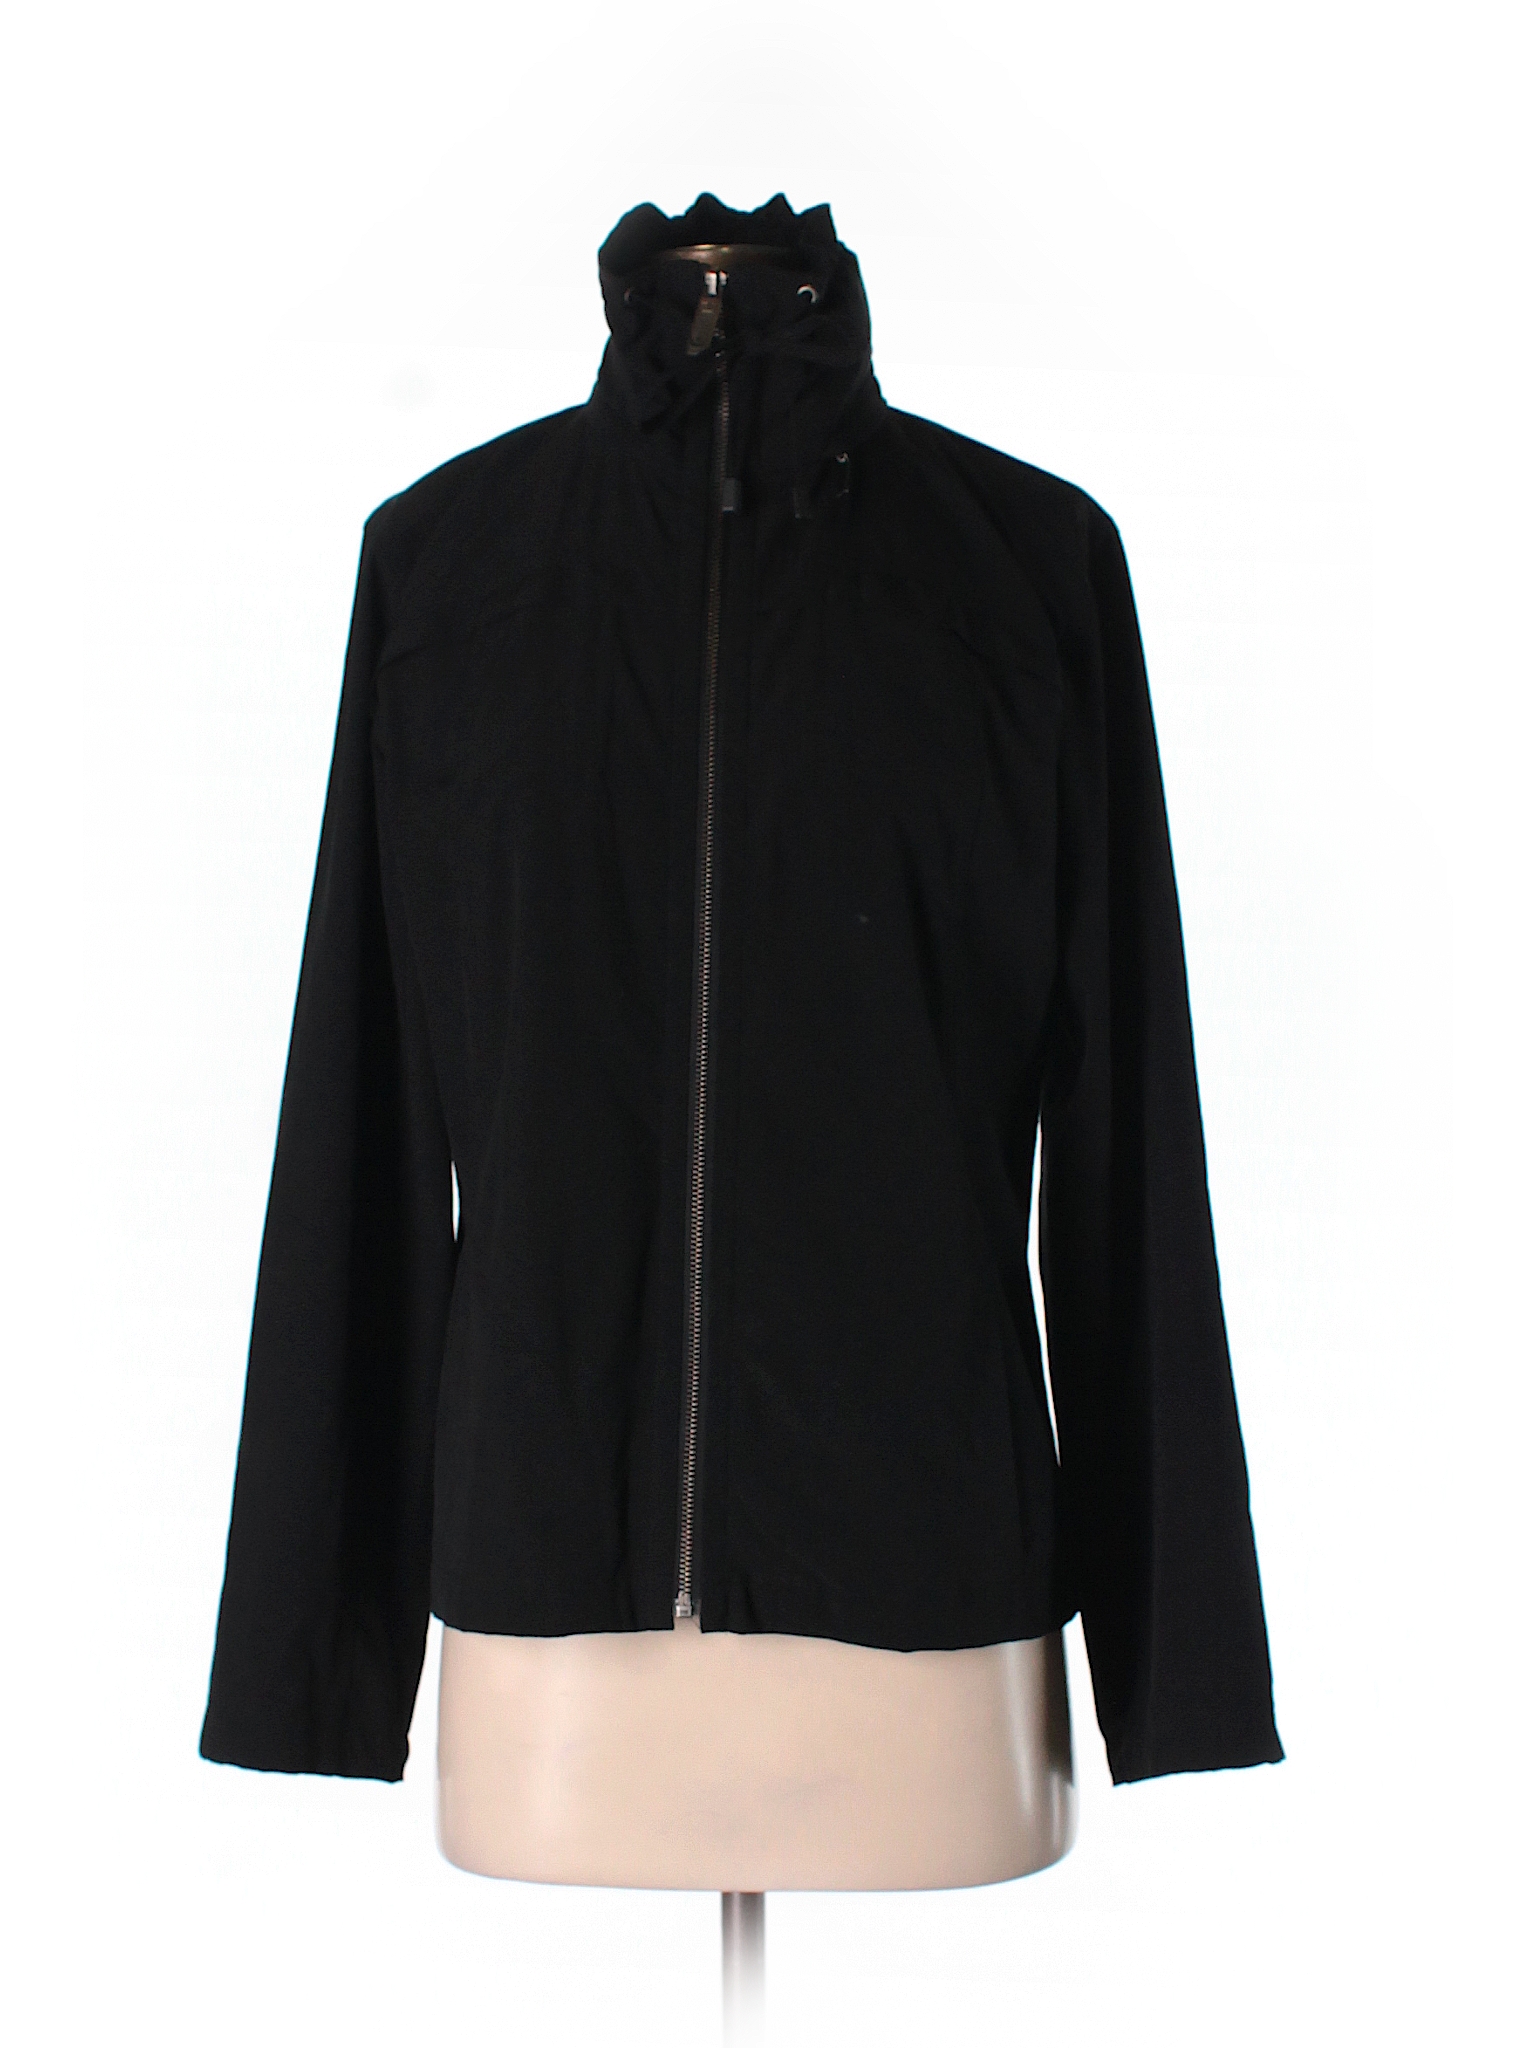 Zenergy by Chico's Solid Black Track Jacket Size Sm (0) - 85% off | thredUP